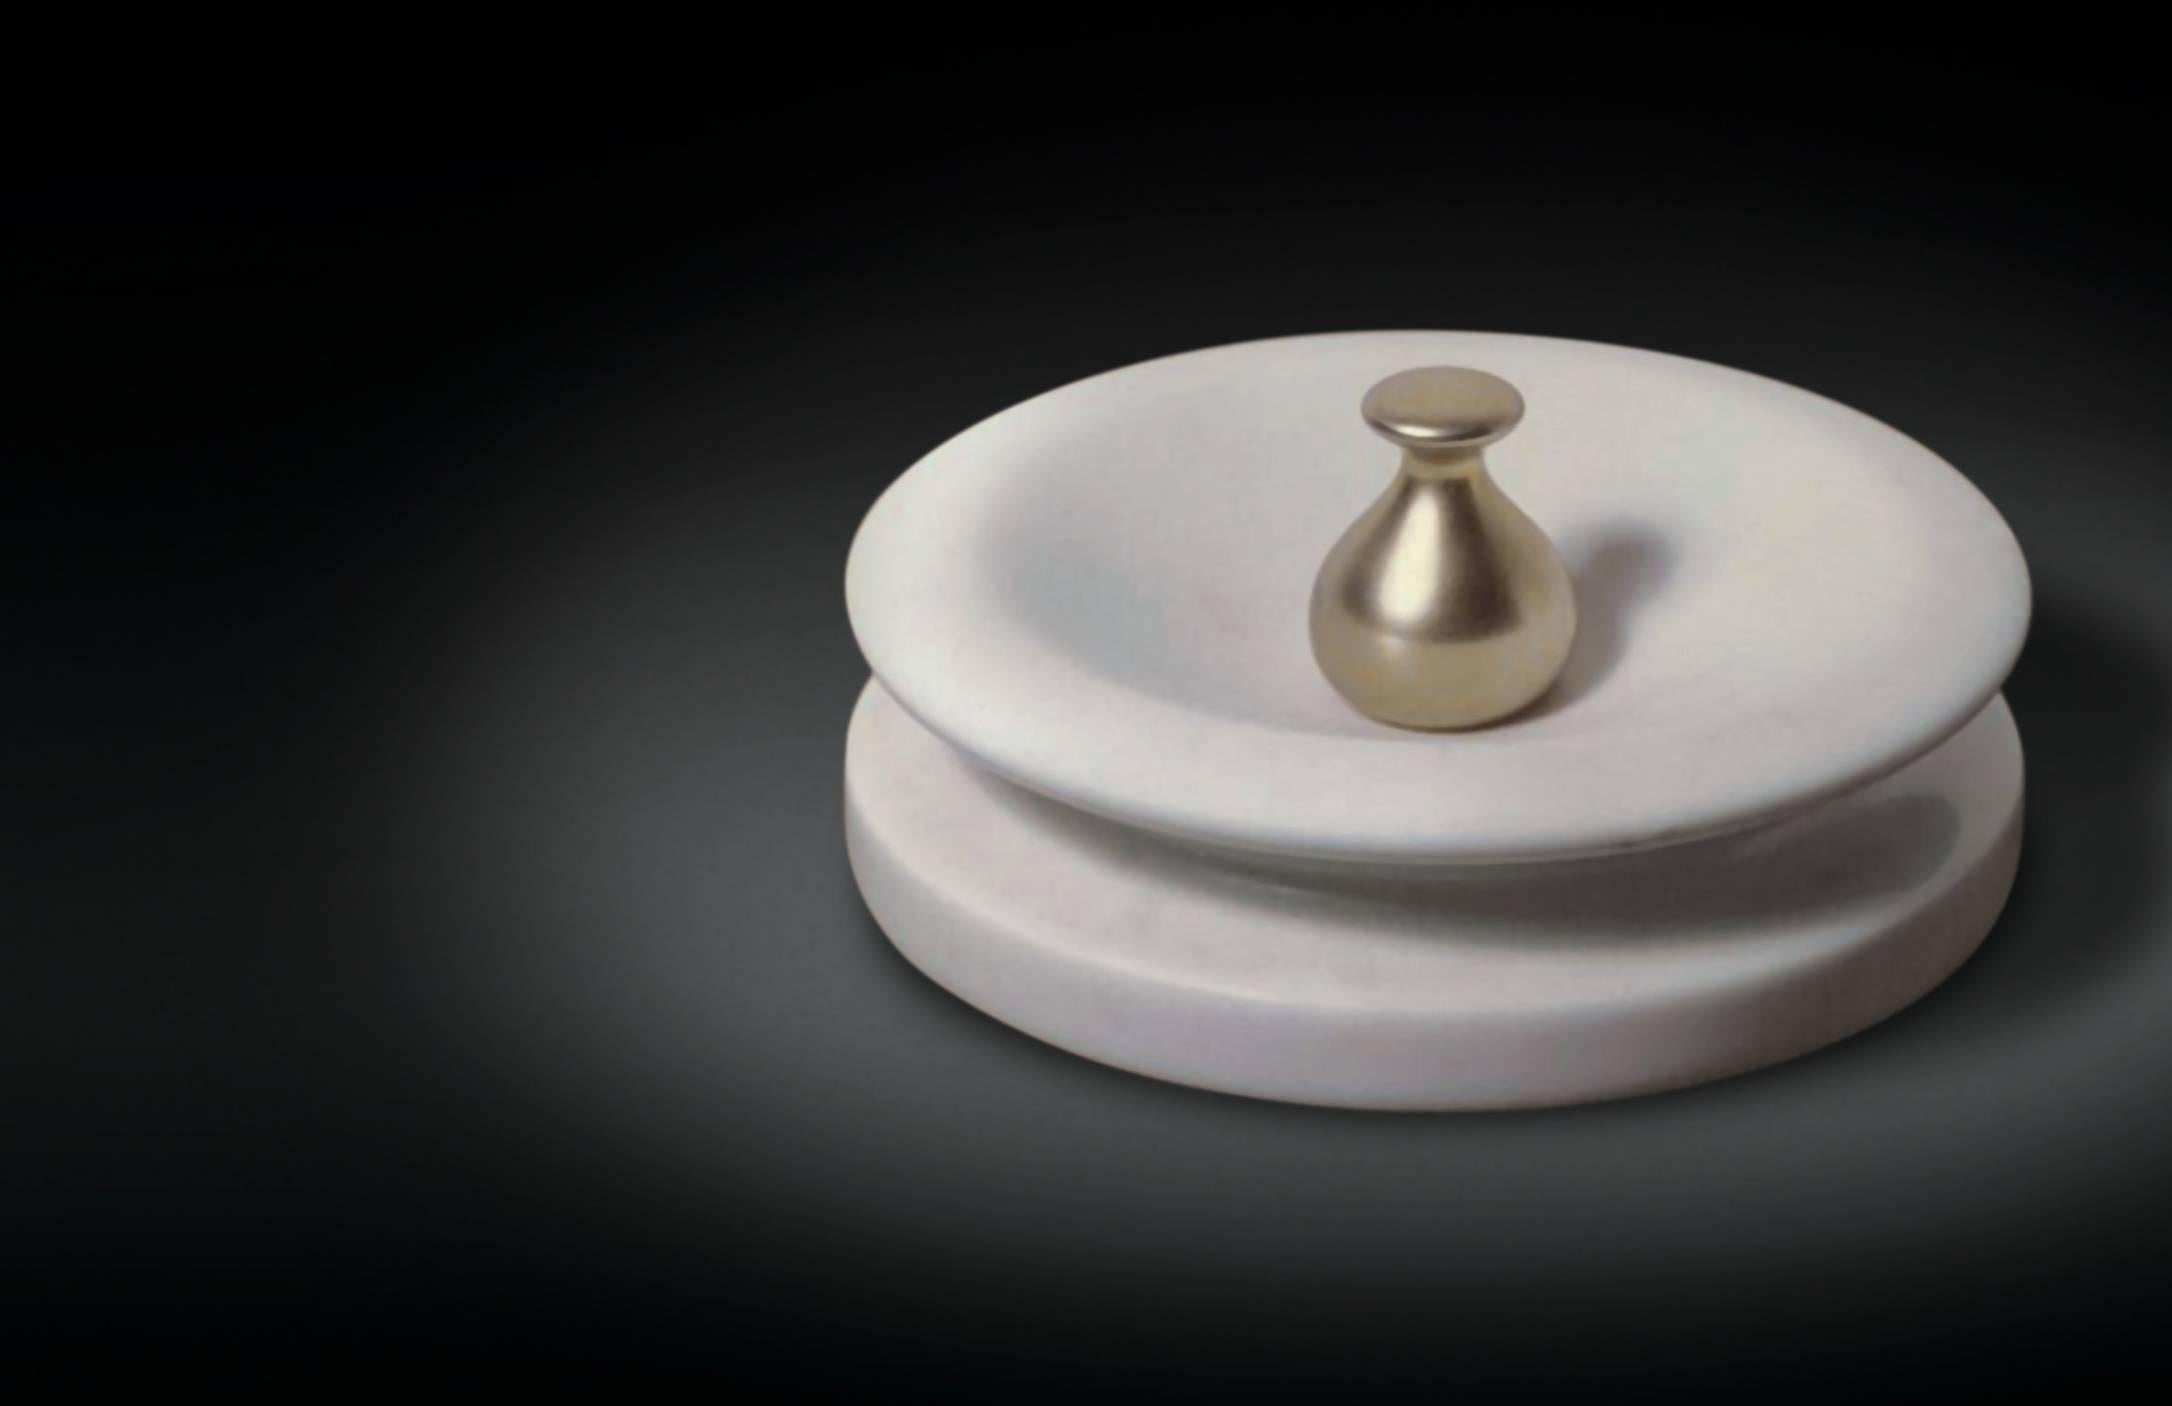 Carrara marble ashtray with solid brass pestle. 
Re-edition of this beautiful ashtray where the cigarette is turned off by a heavy brass pestle.